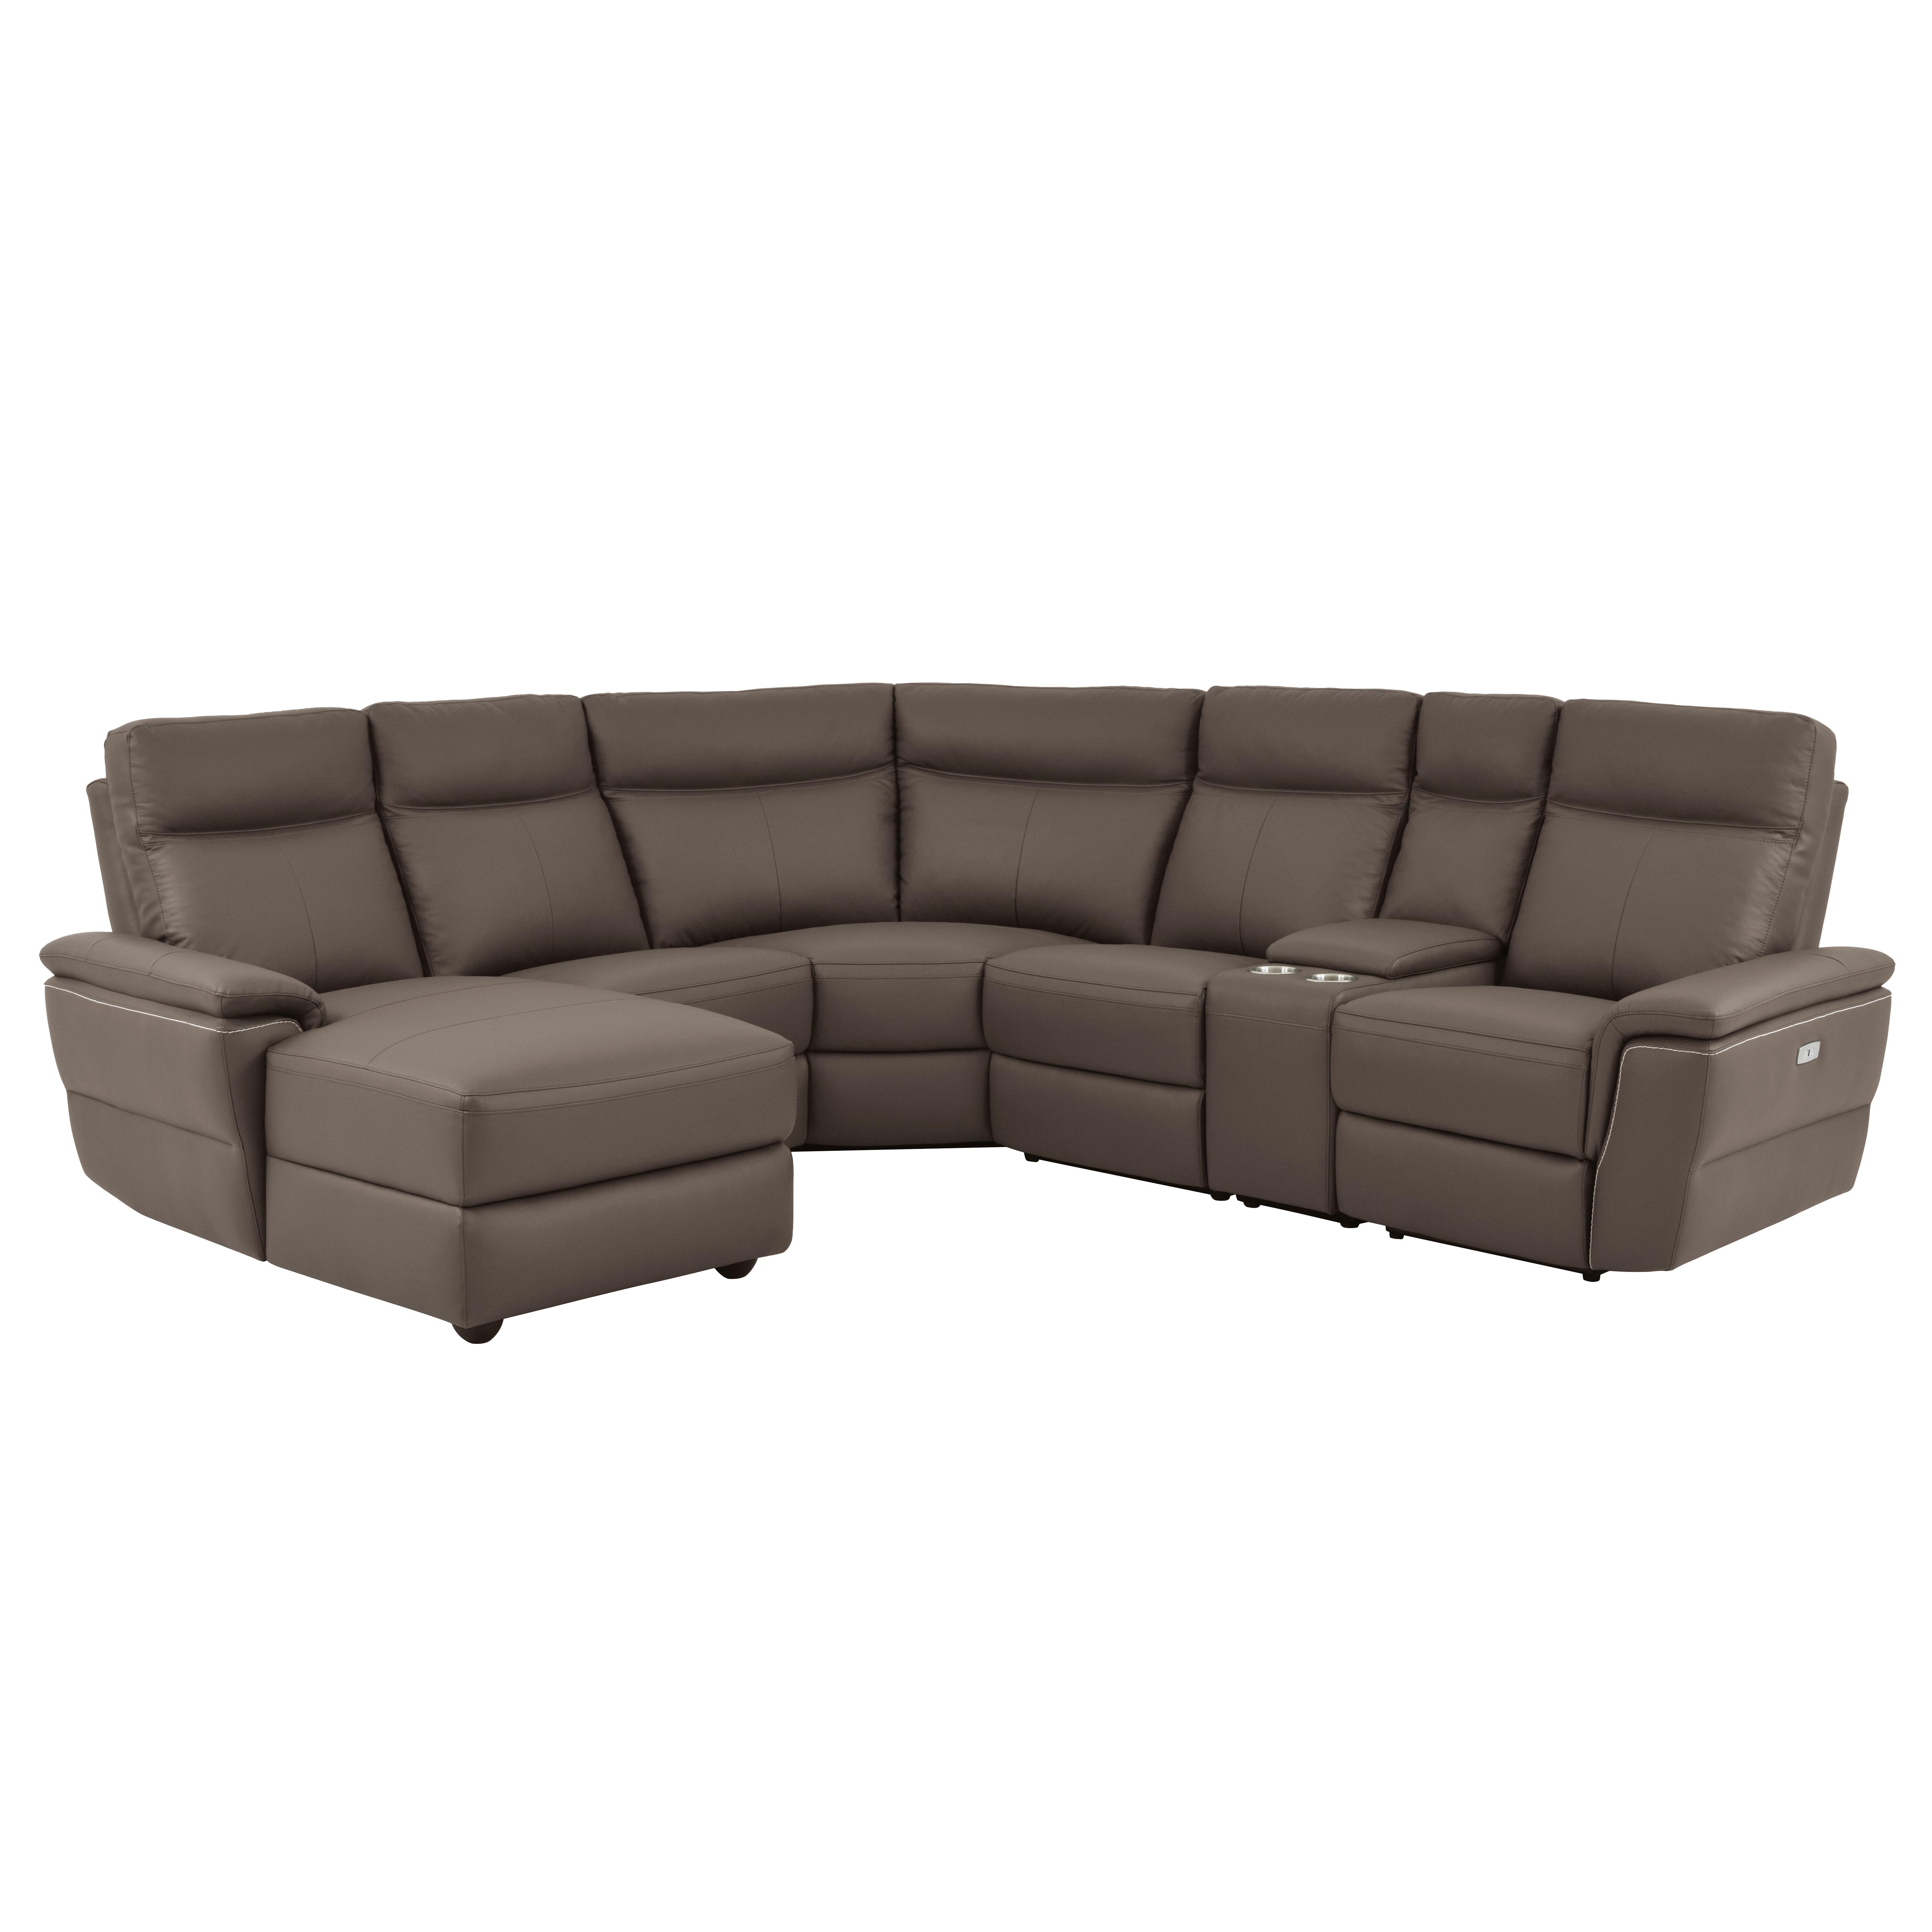 

    
Contemporary Raisin Leather 6-Piece LSF Power Reclining Sectional Homelegance 8308*6A1PW Olympia
